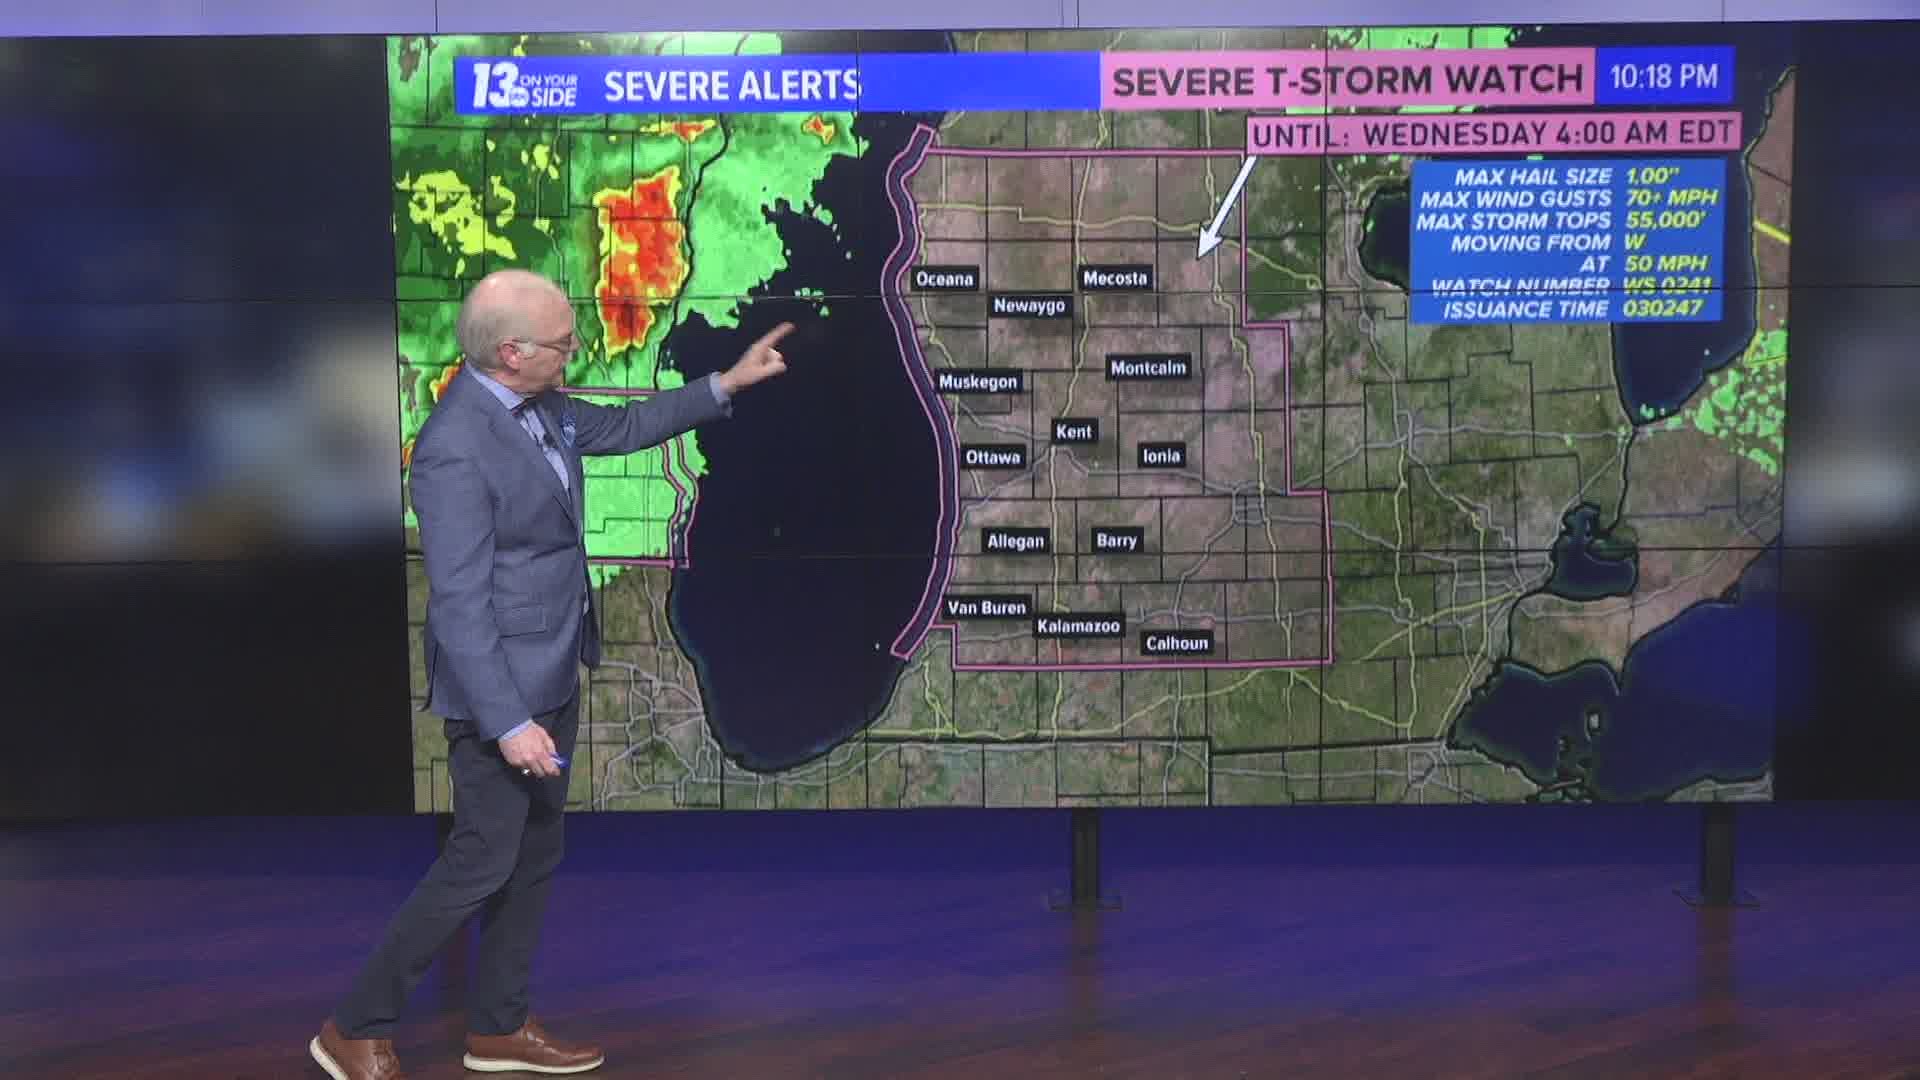 Severe thunderstorms warnings are in effect for West Michigan.